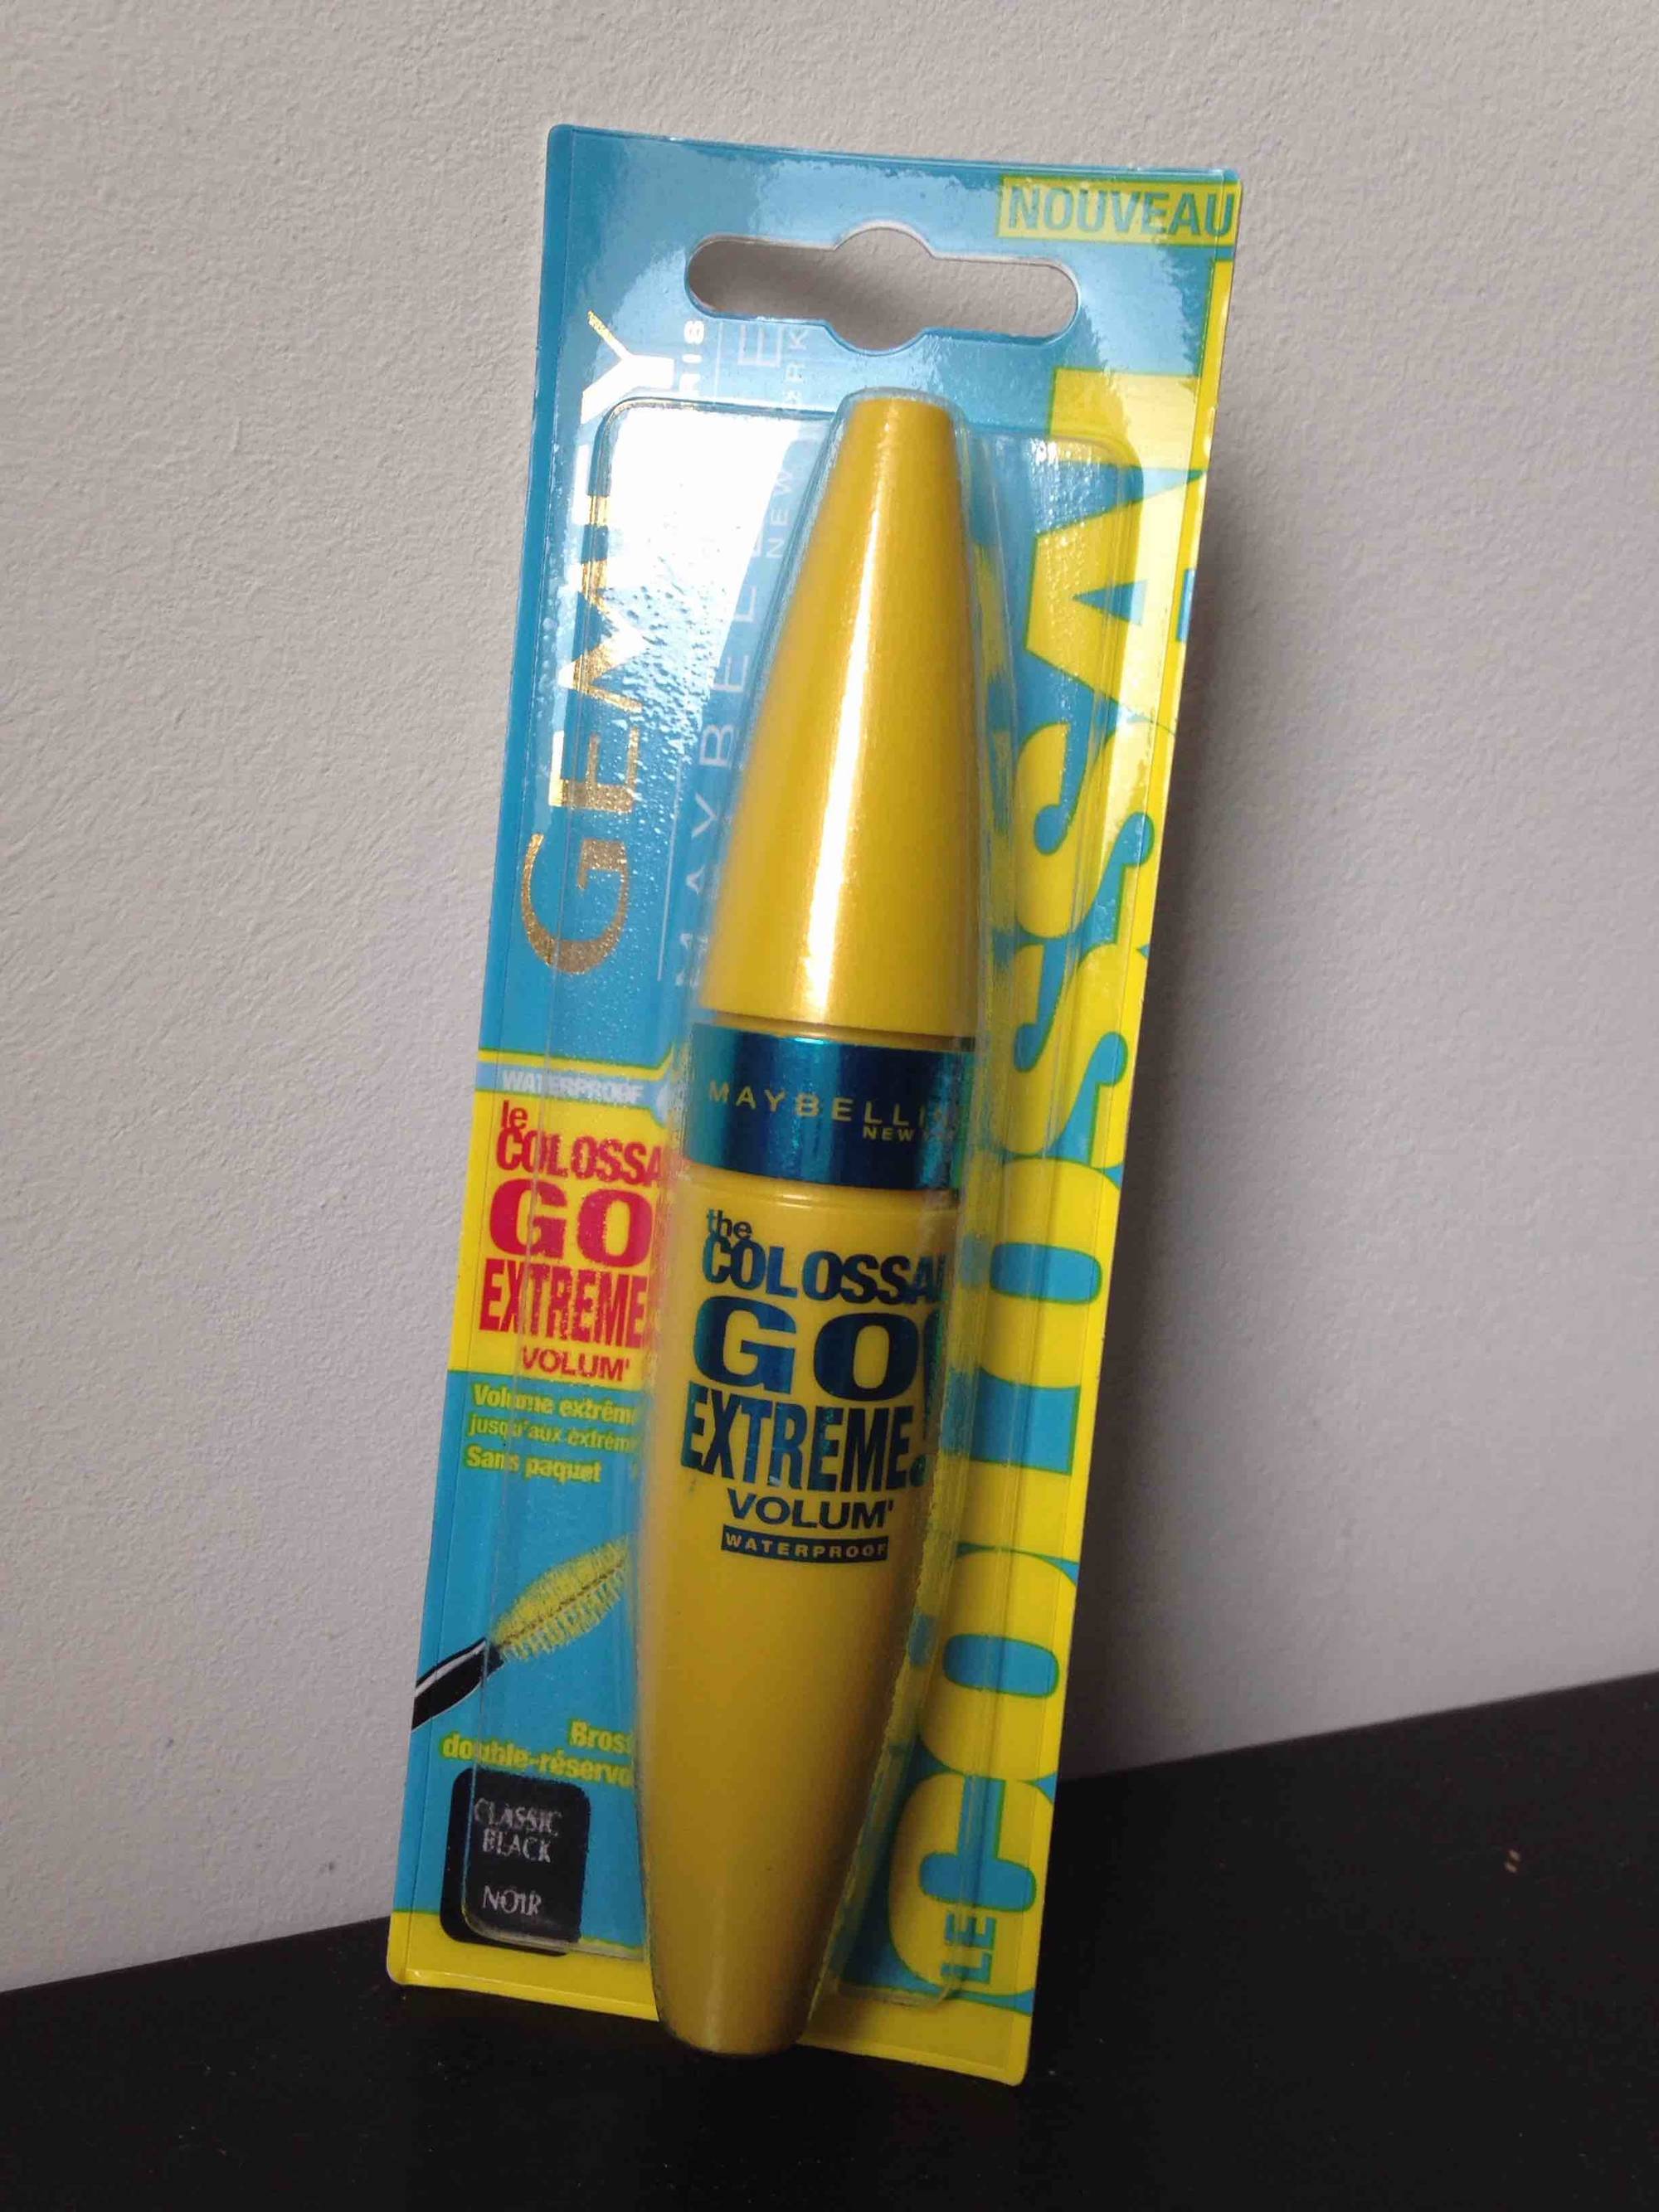 GEMEY MAYBELLINE - The colossal go extreme volum waterproof - Mascara